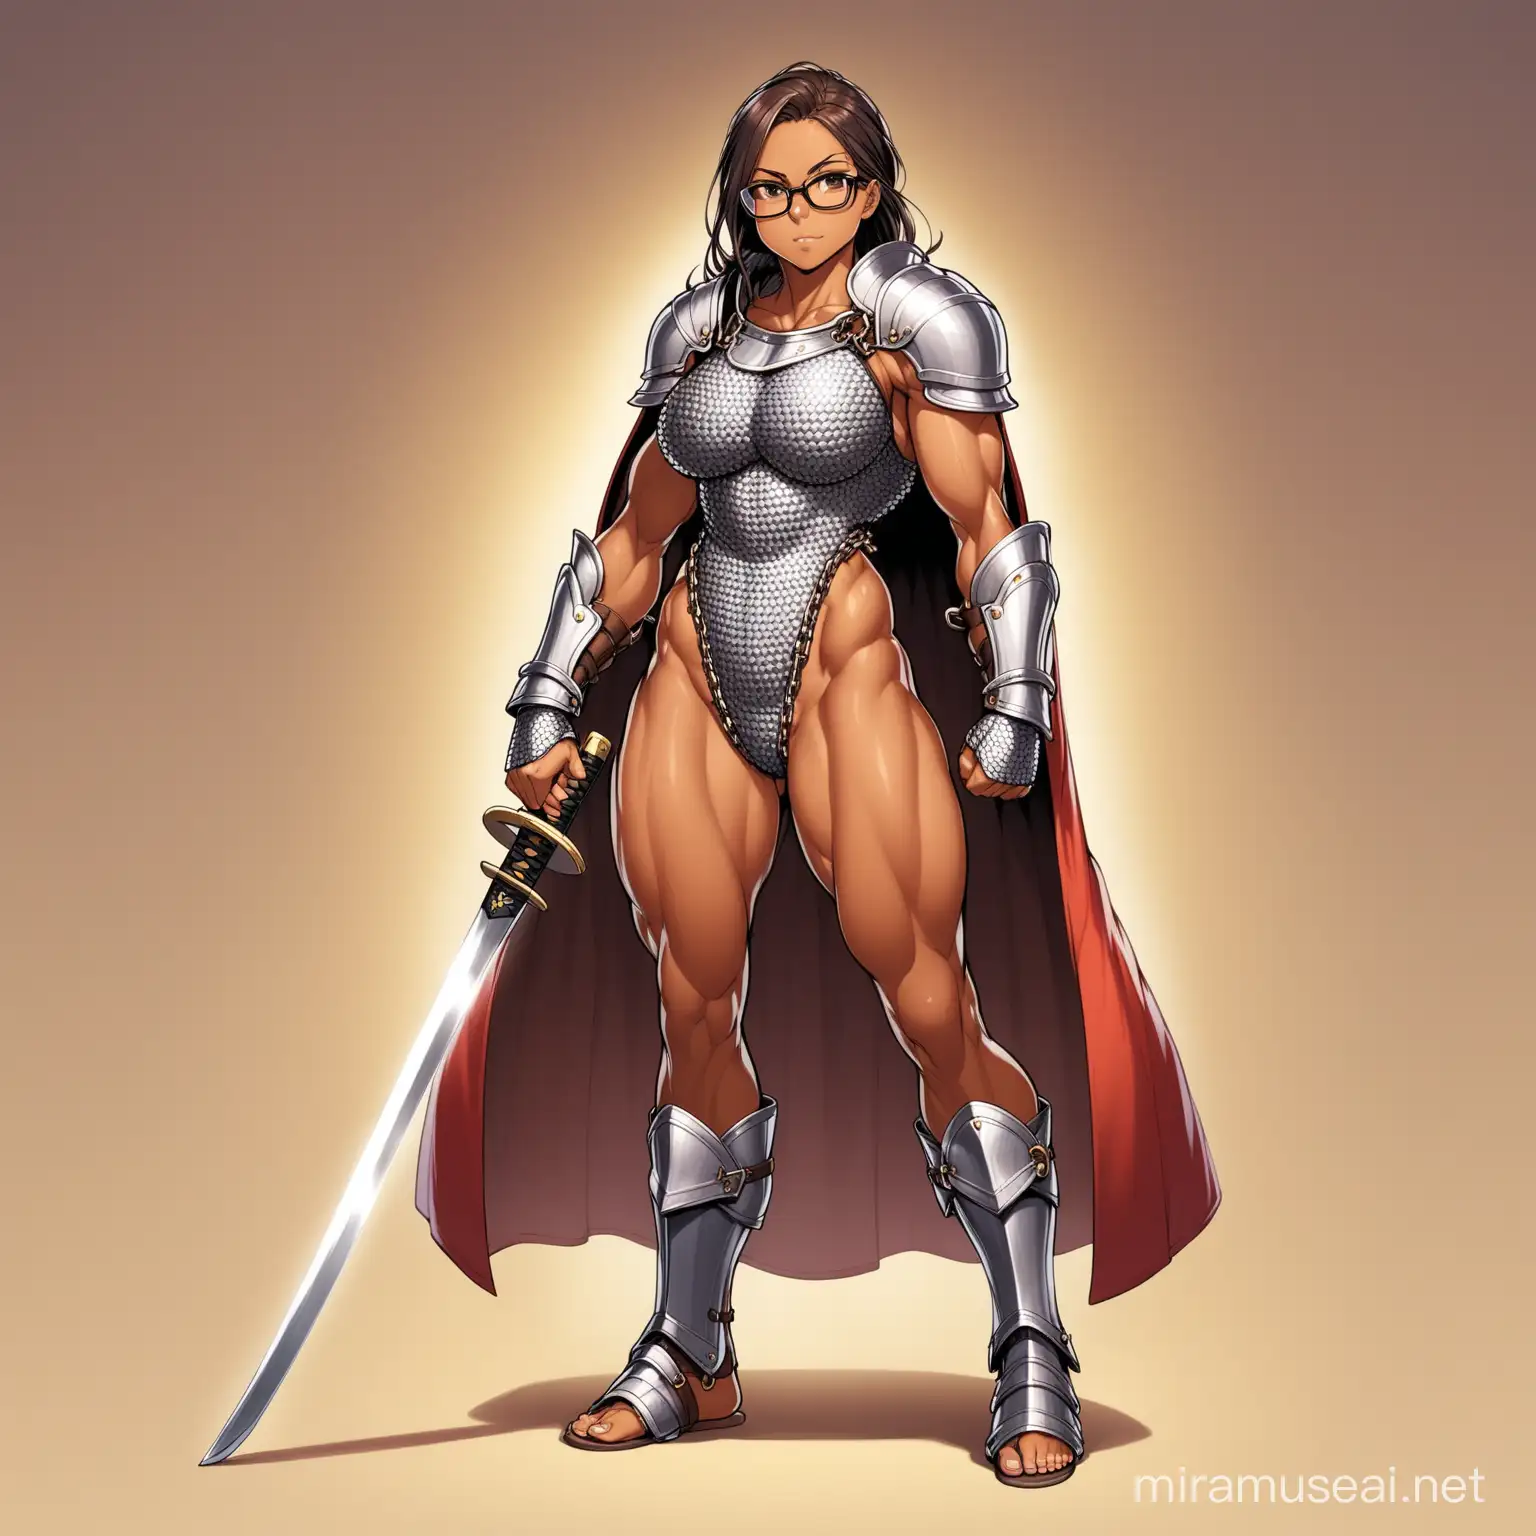 Small Female, glasses,athletic, toned,muscular,full body tan, large bust,chain mail one-piece armor,katana